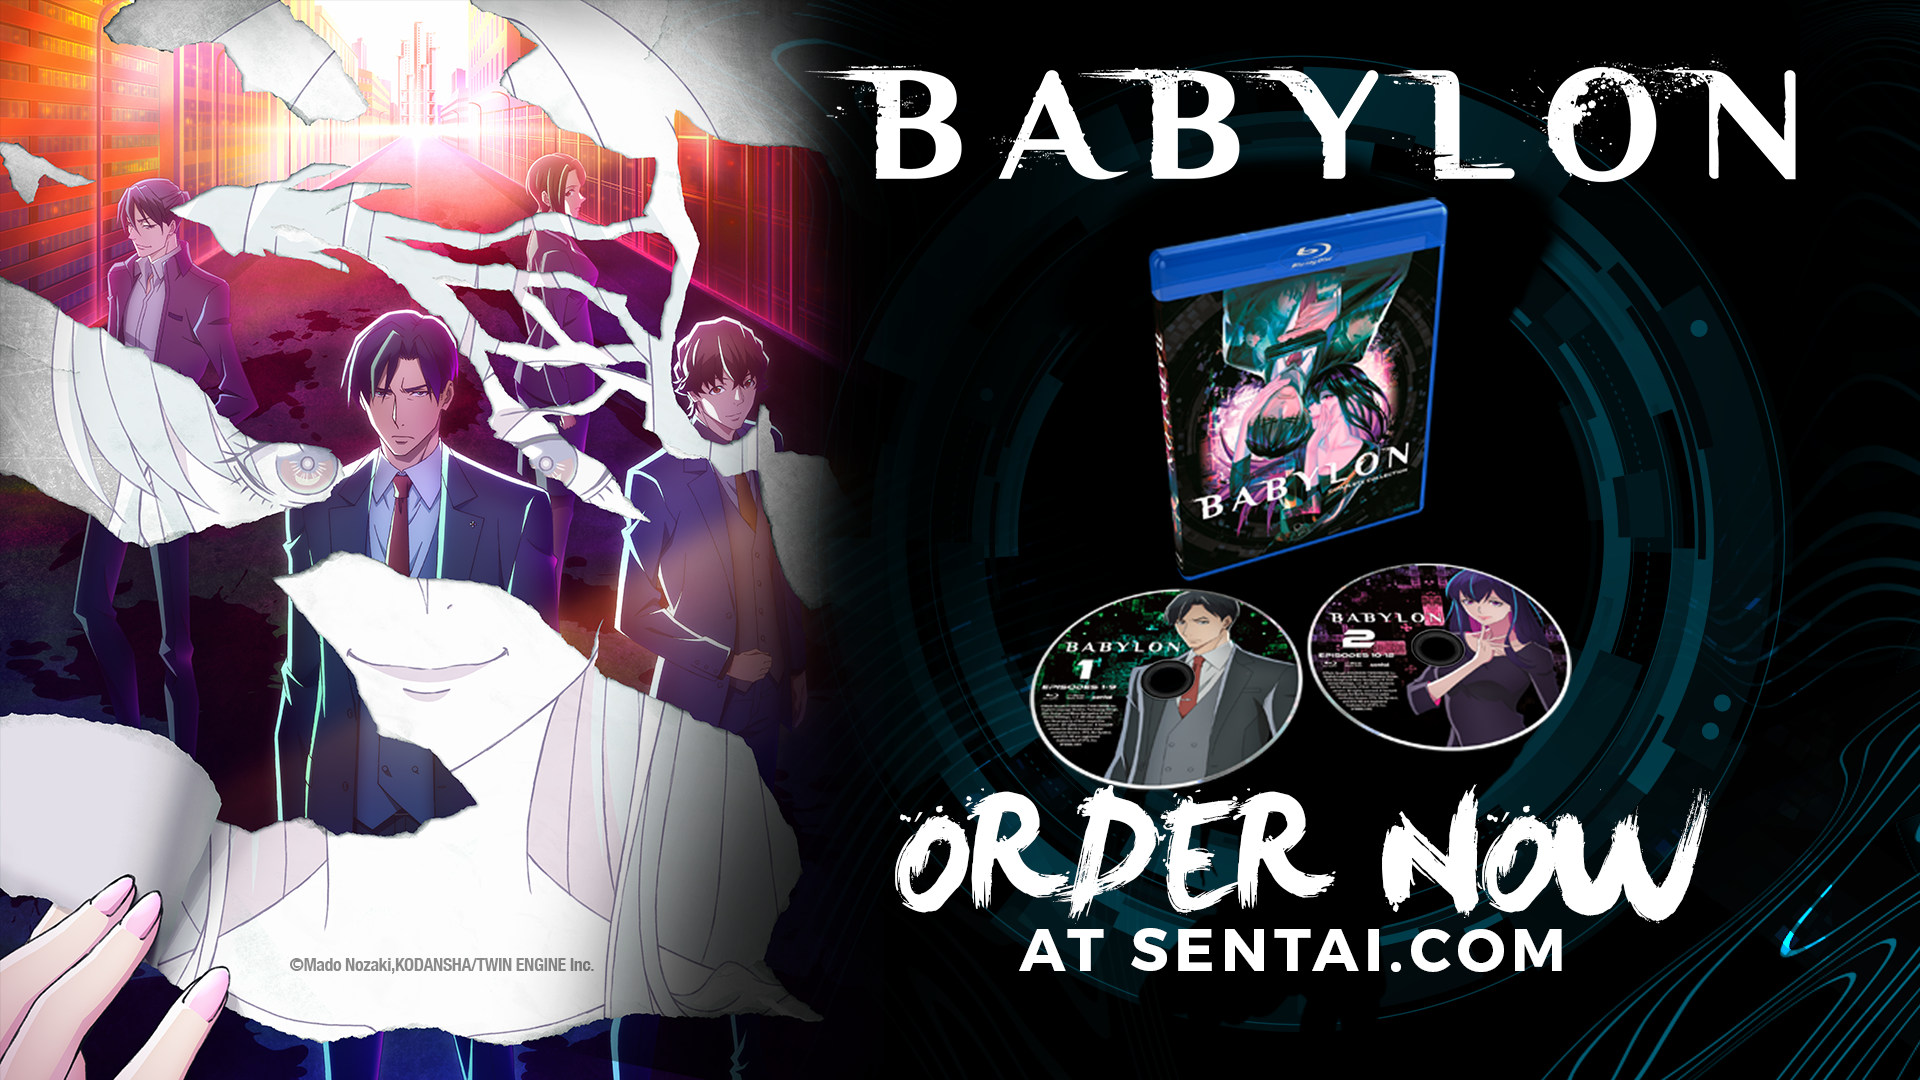 The image contains the Babylon key art featuring the main characters along with the Babylon Bluray packaging and the two discs. The text says, "Babylon" and "Order now at sentai.com"